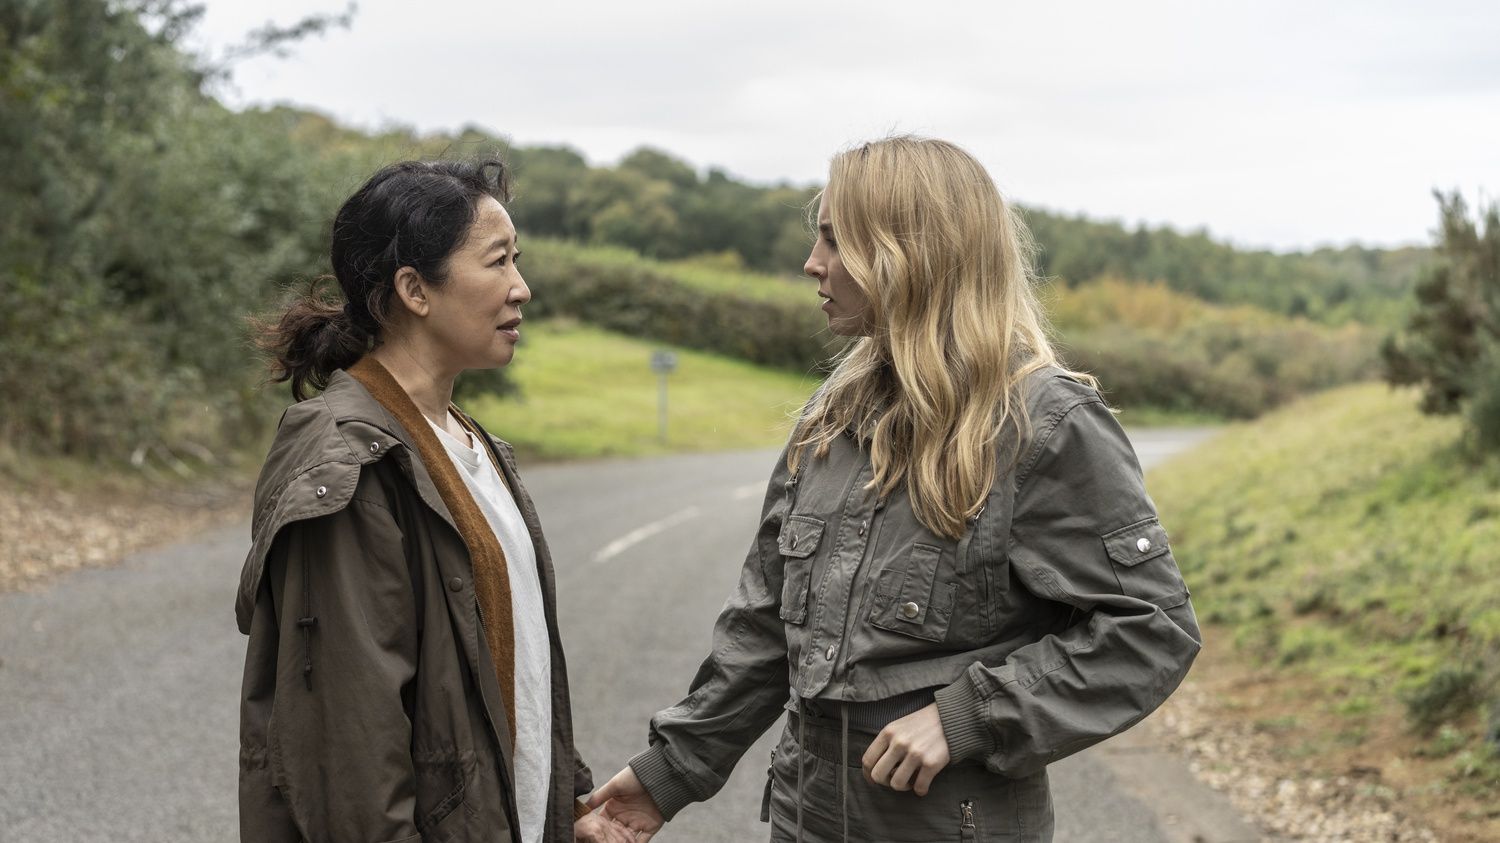 Comer and Sandra Oh as Eve in Killing Eve